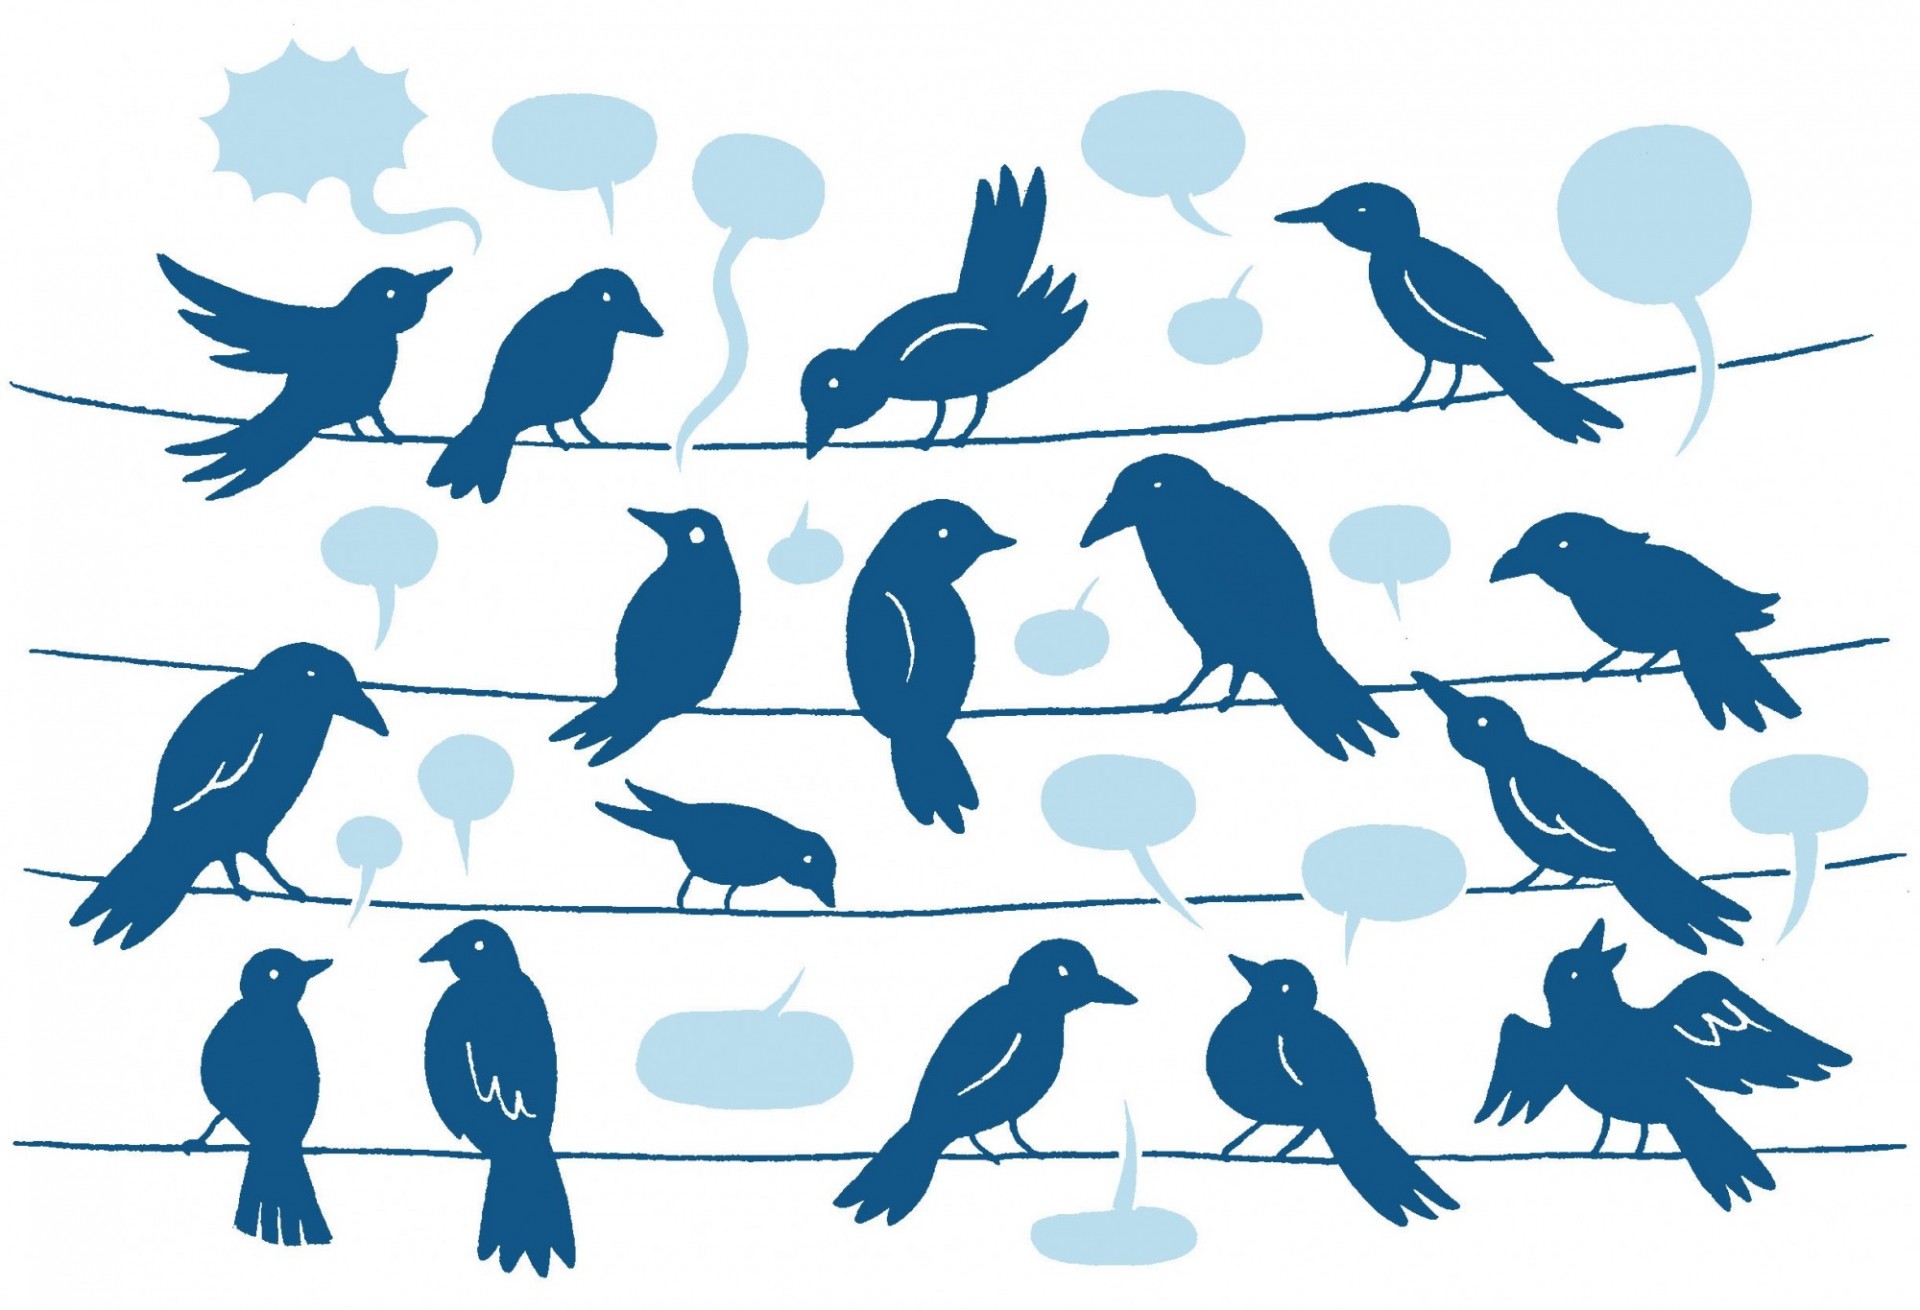 image of birds on a telephone line